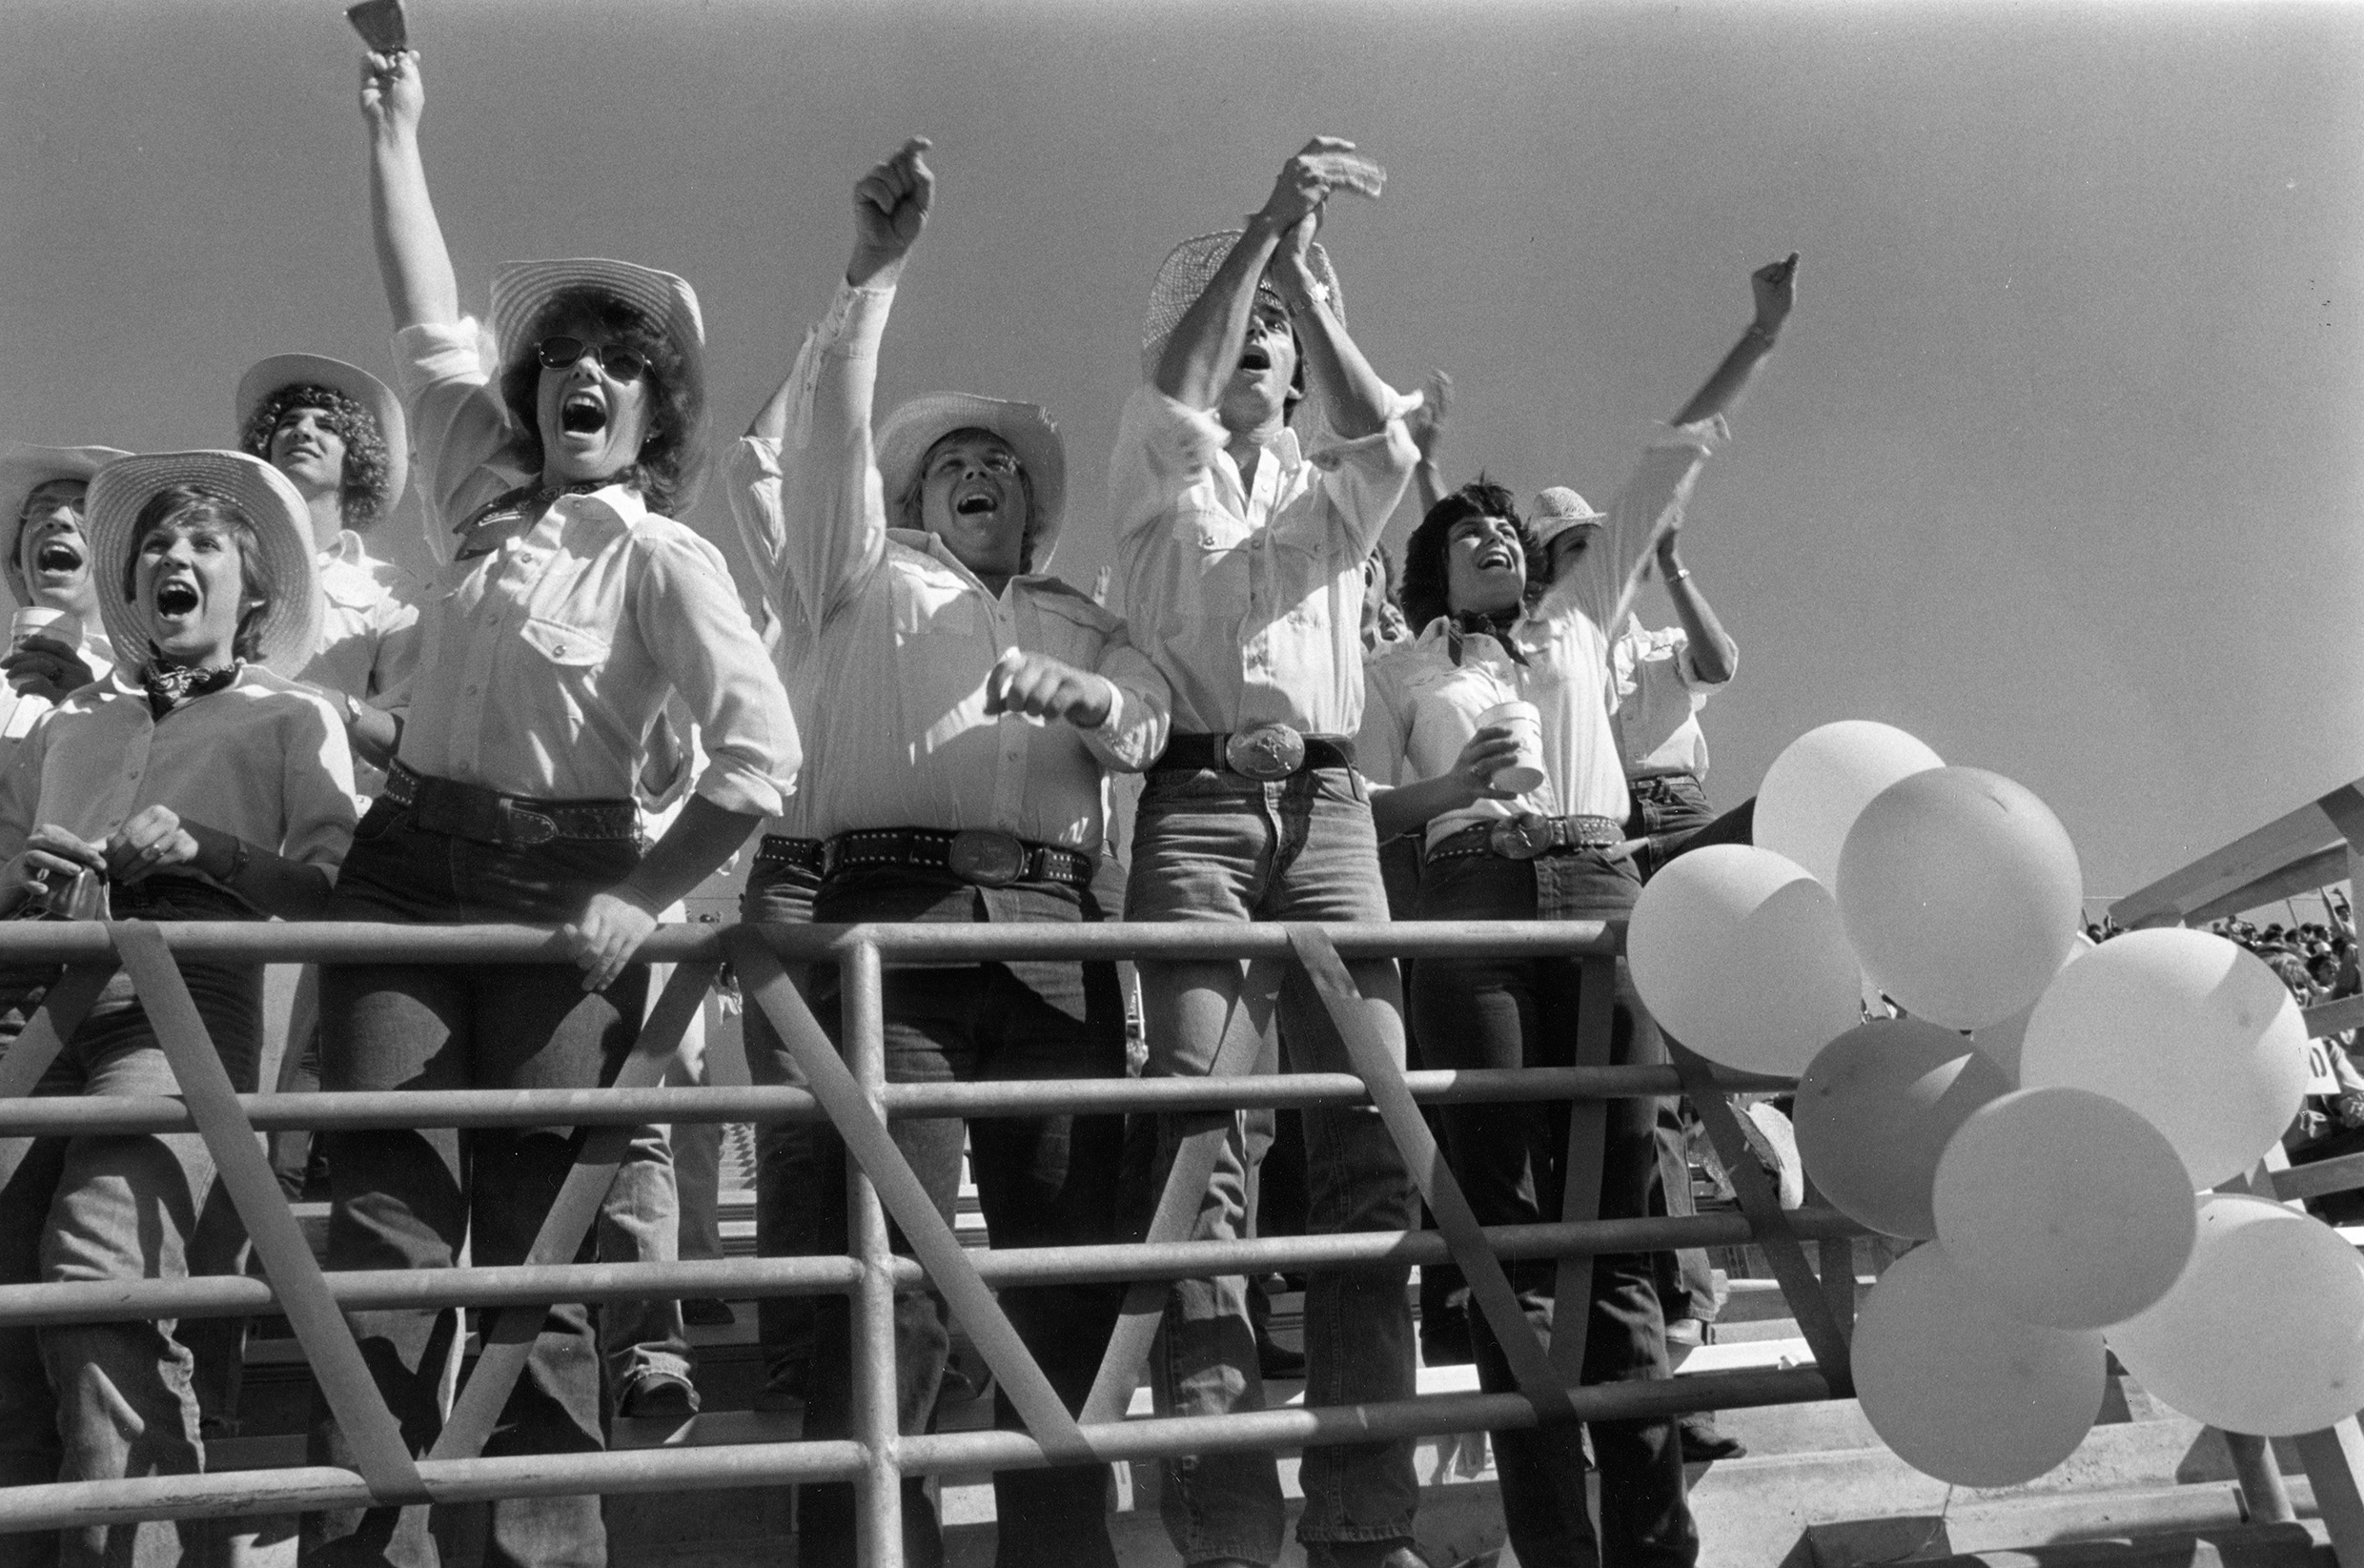 Spirit group cheering and ringing cowbells along the front rail of the stands at a football stadium.